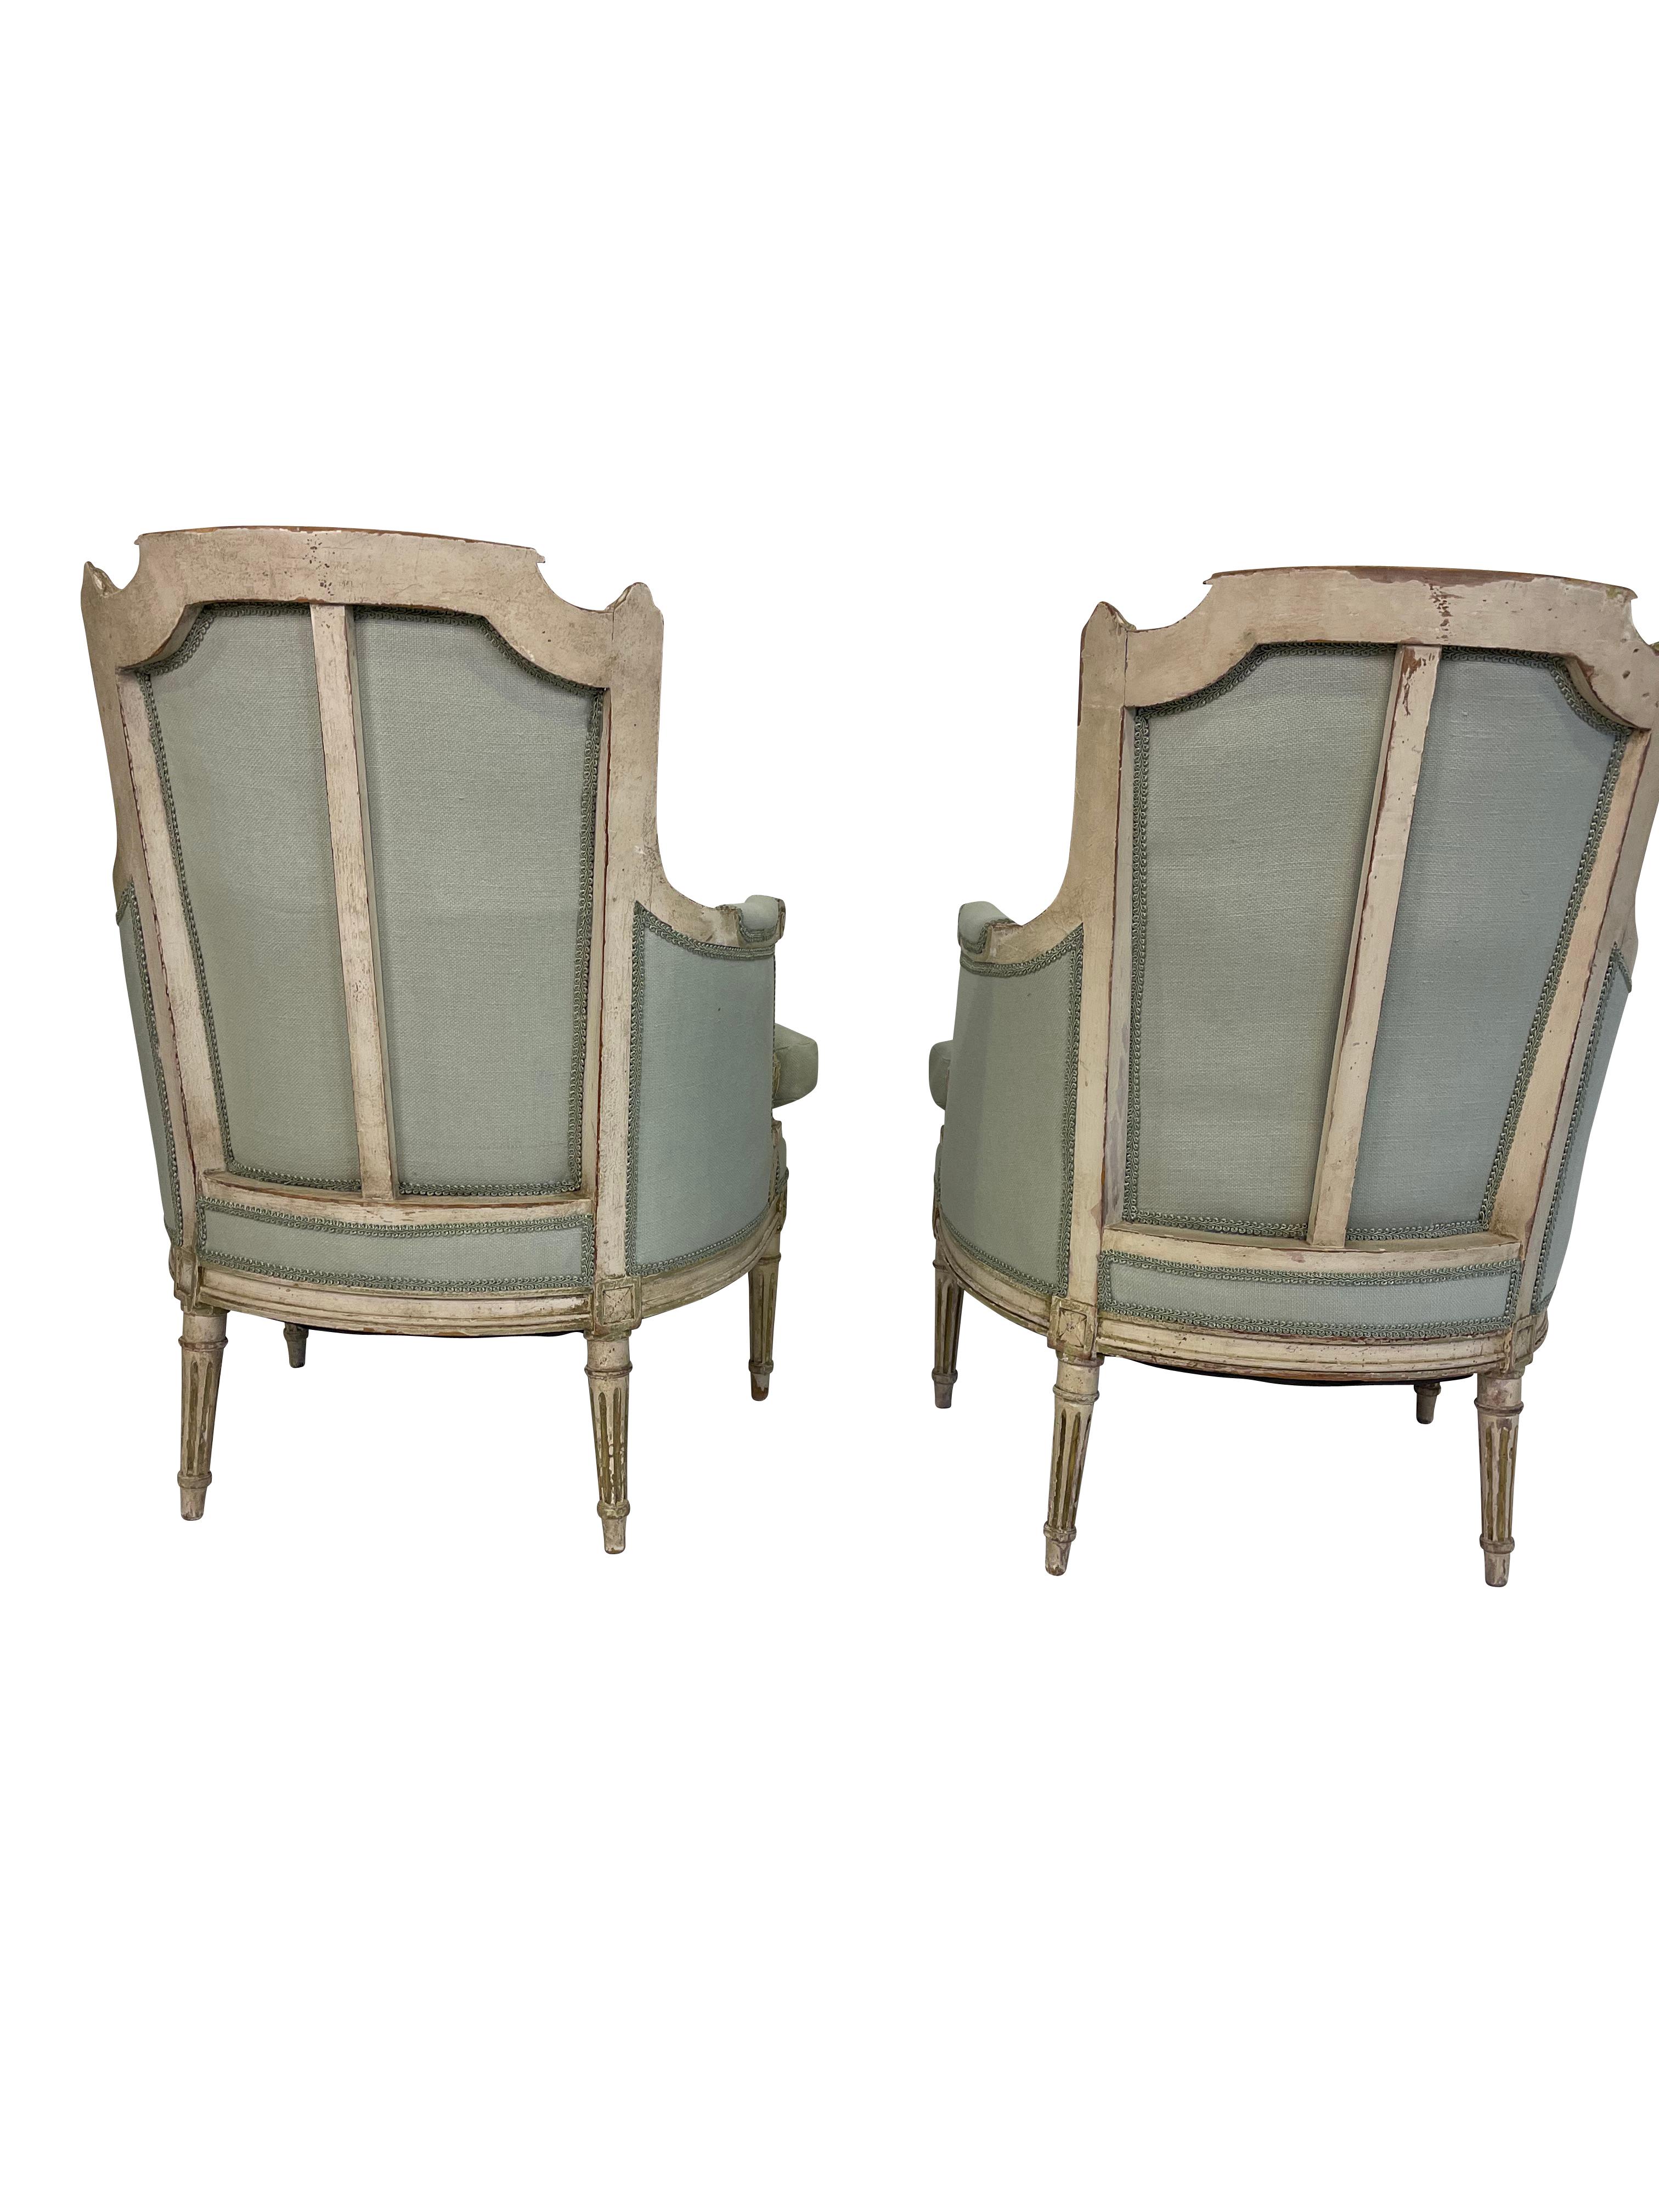 French Pair of Louis XVI Style Bergeres in Blue/Green Linen Newly Reupholstered